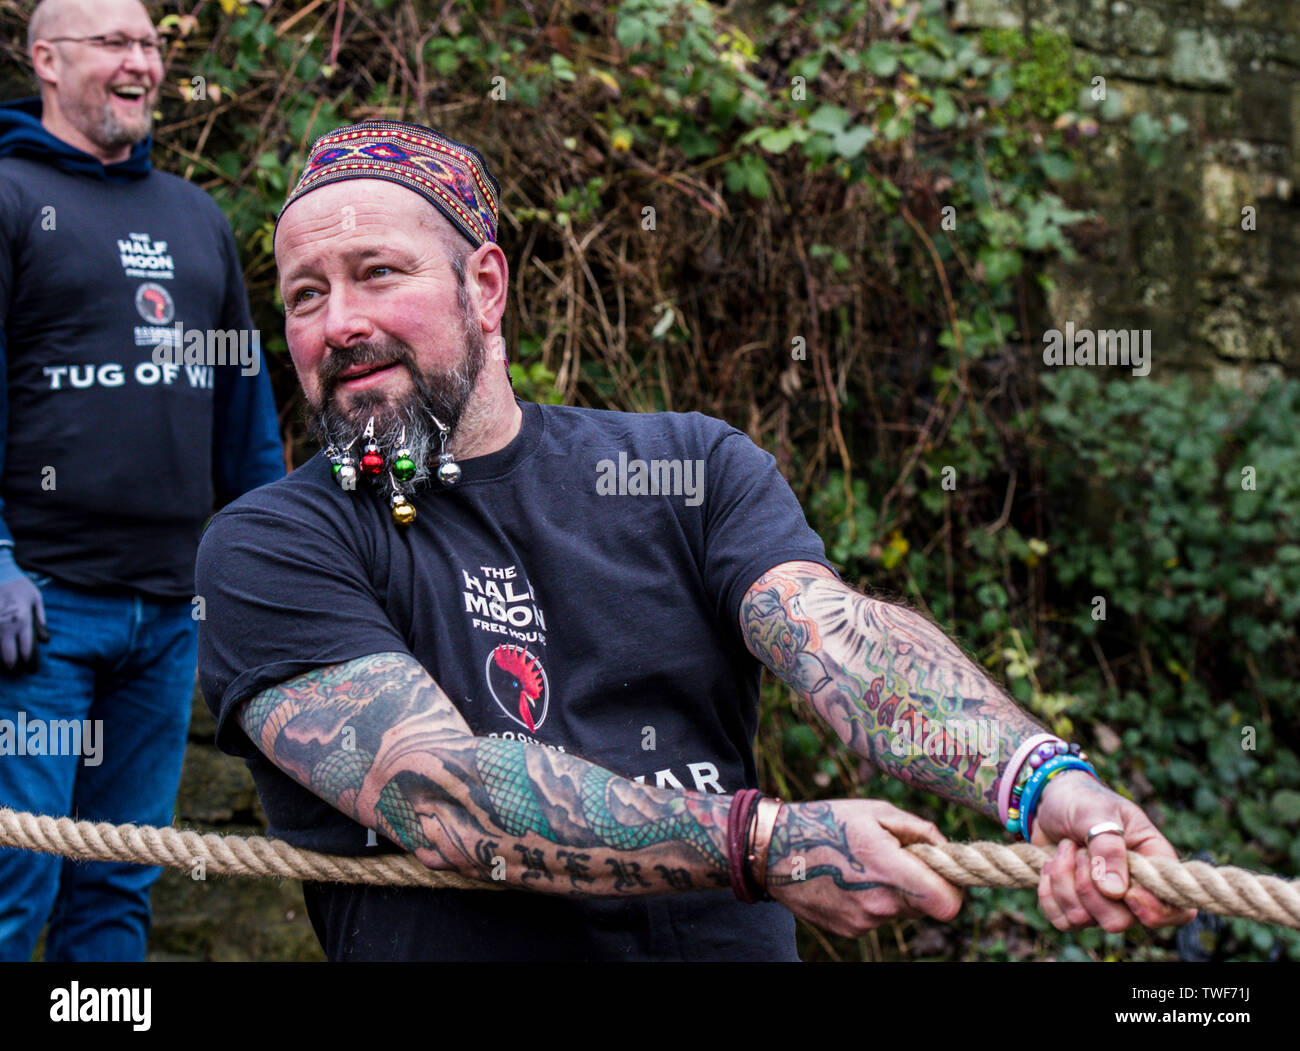 Tattooed man with Christmas baubles in his beard competing in the traditional Boxing Day Tug of War between the banks of the River Nidd. Stock Photo